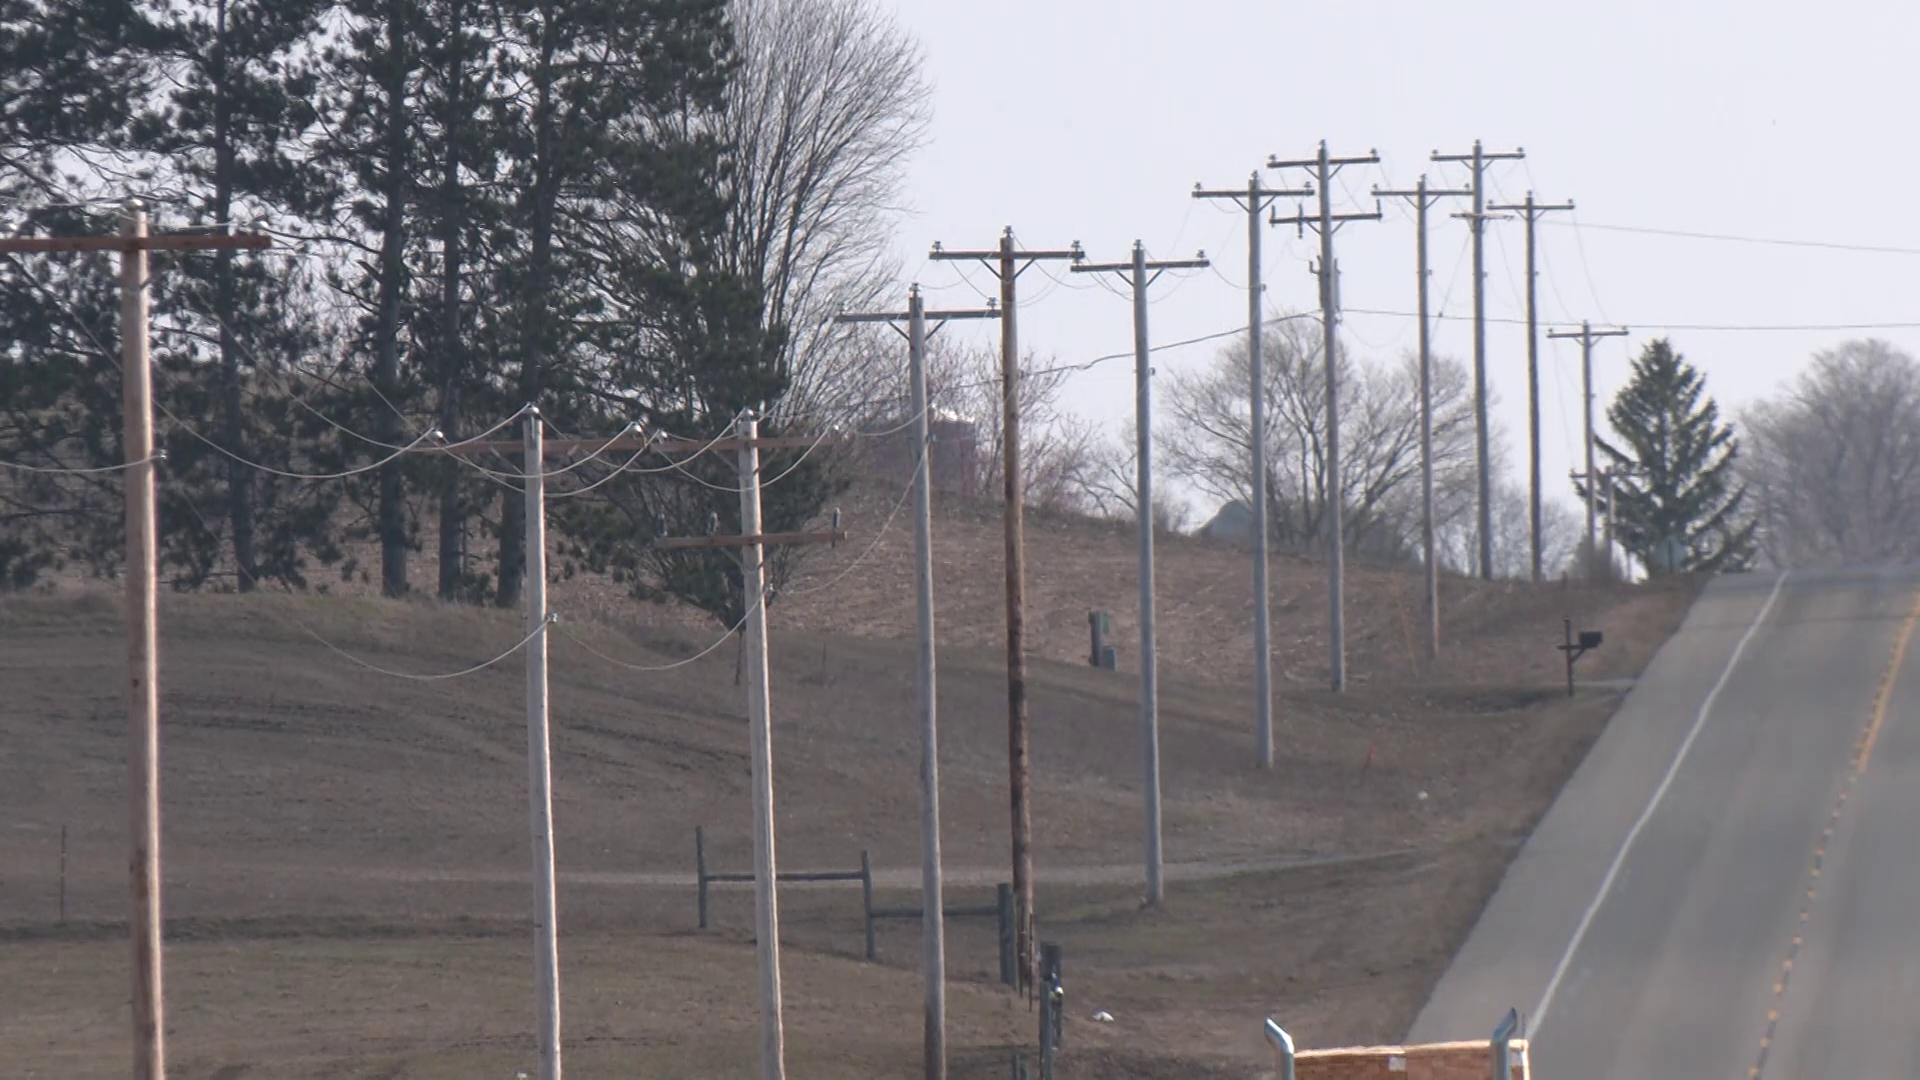 Consumers Energy will bury some power lines in counties with frequent outages